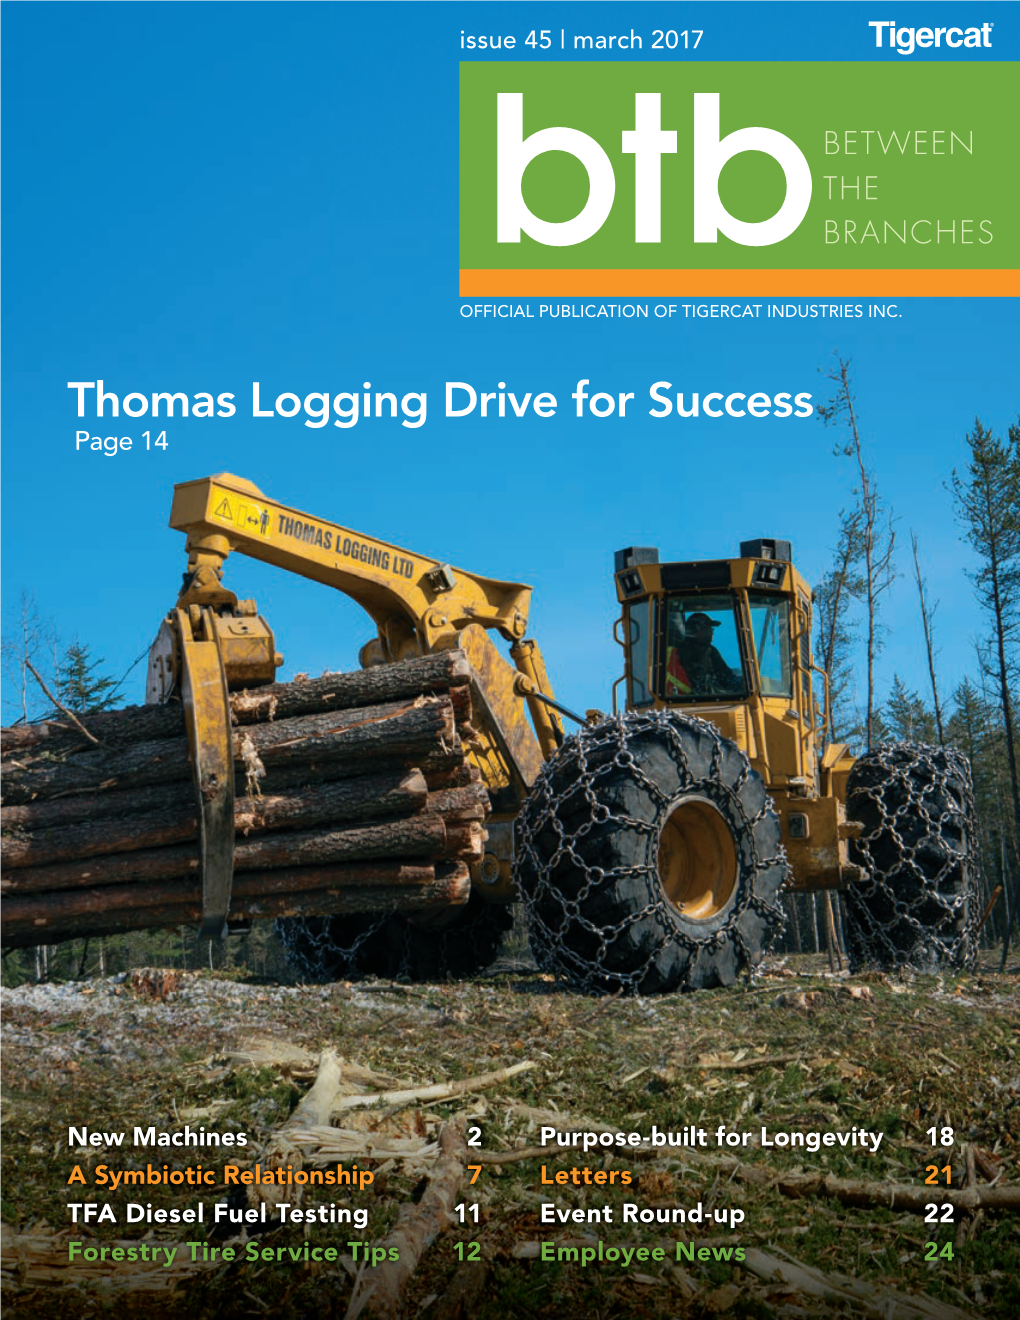 Thomas Logging Drive for Success Page 14